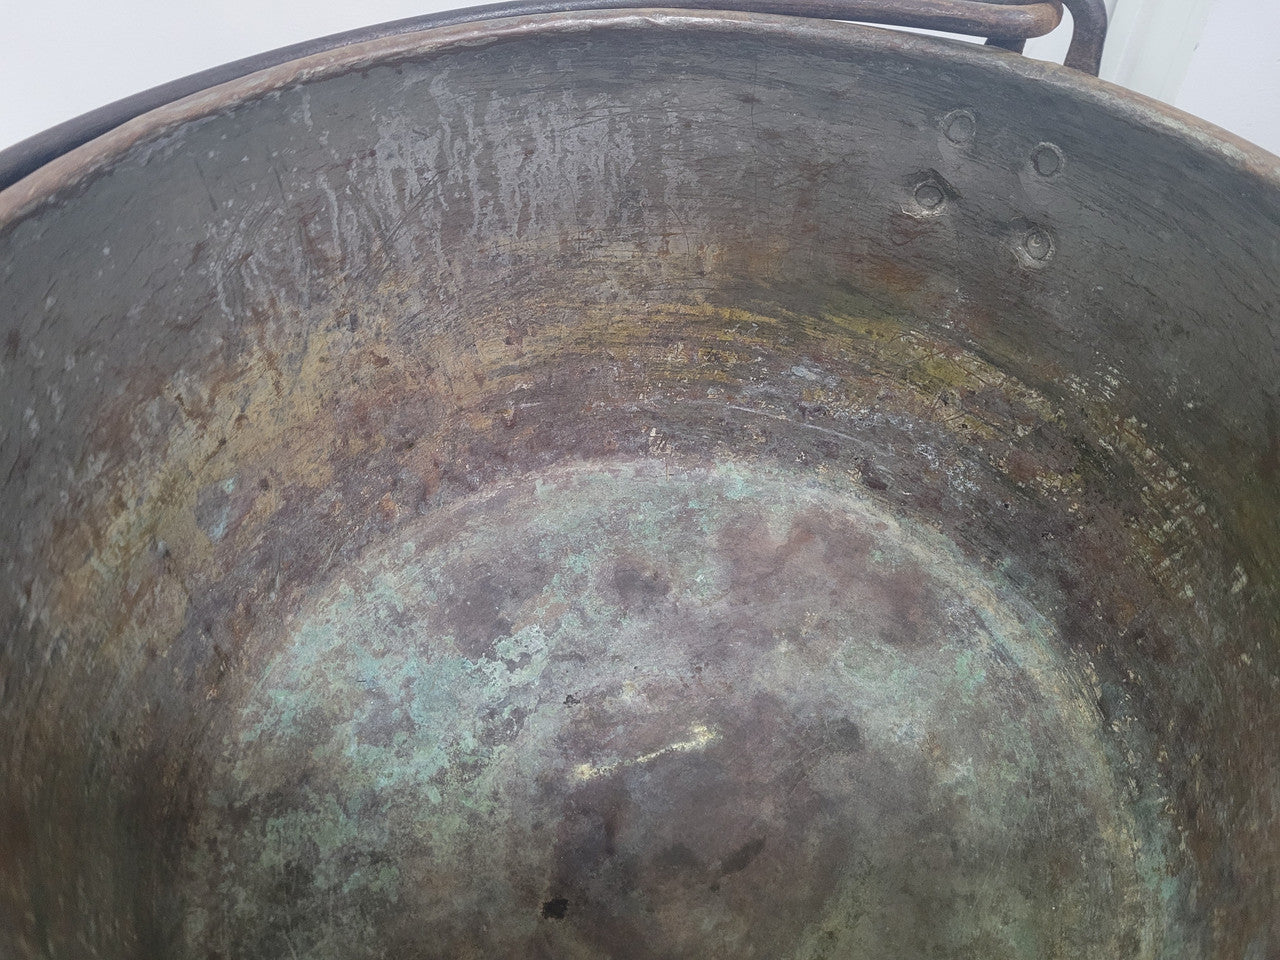 Large French brass cauldron with lid and handle. It is in original condition with some signs of wear please view photos.